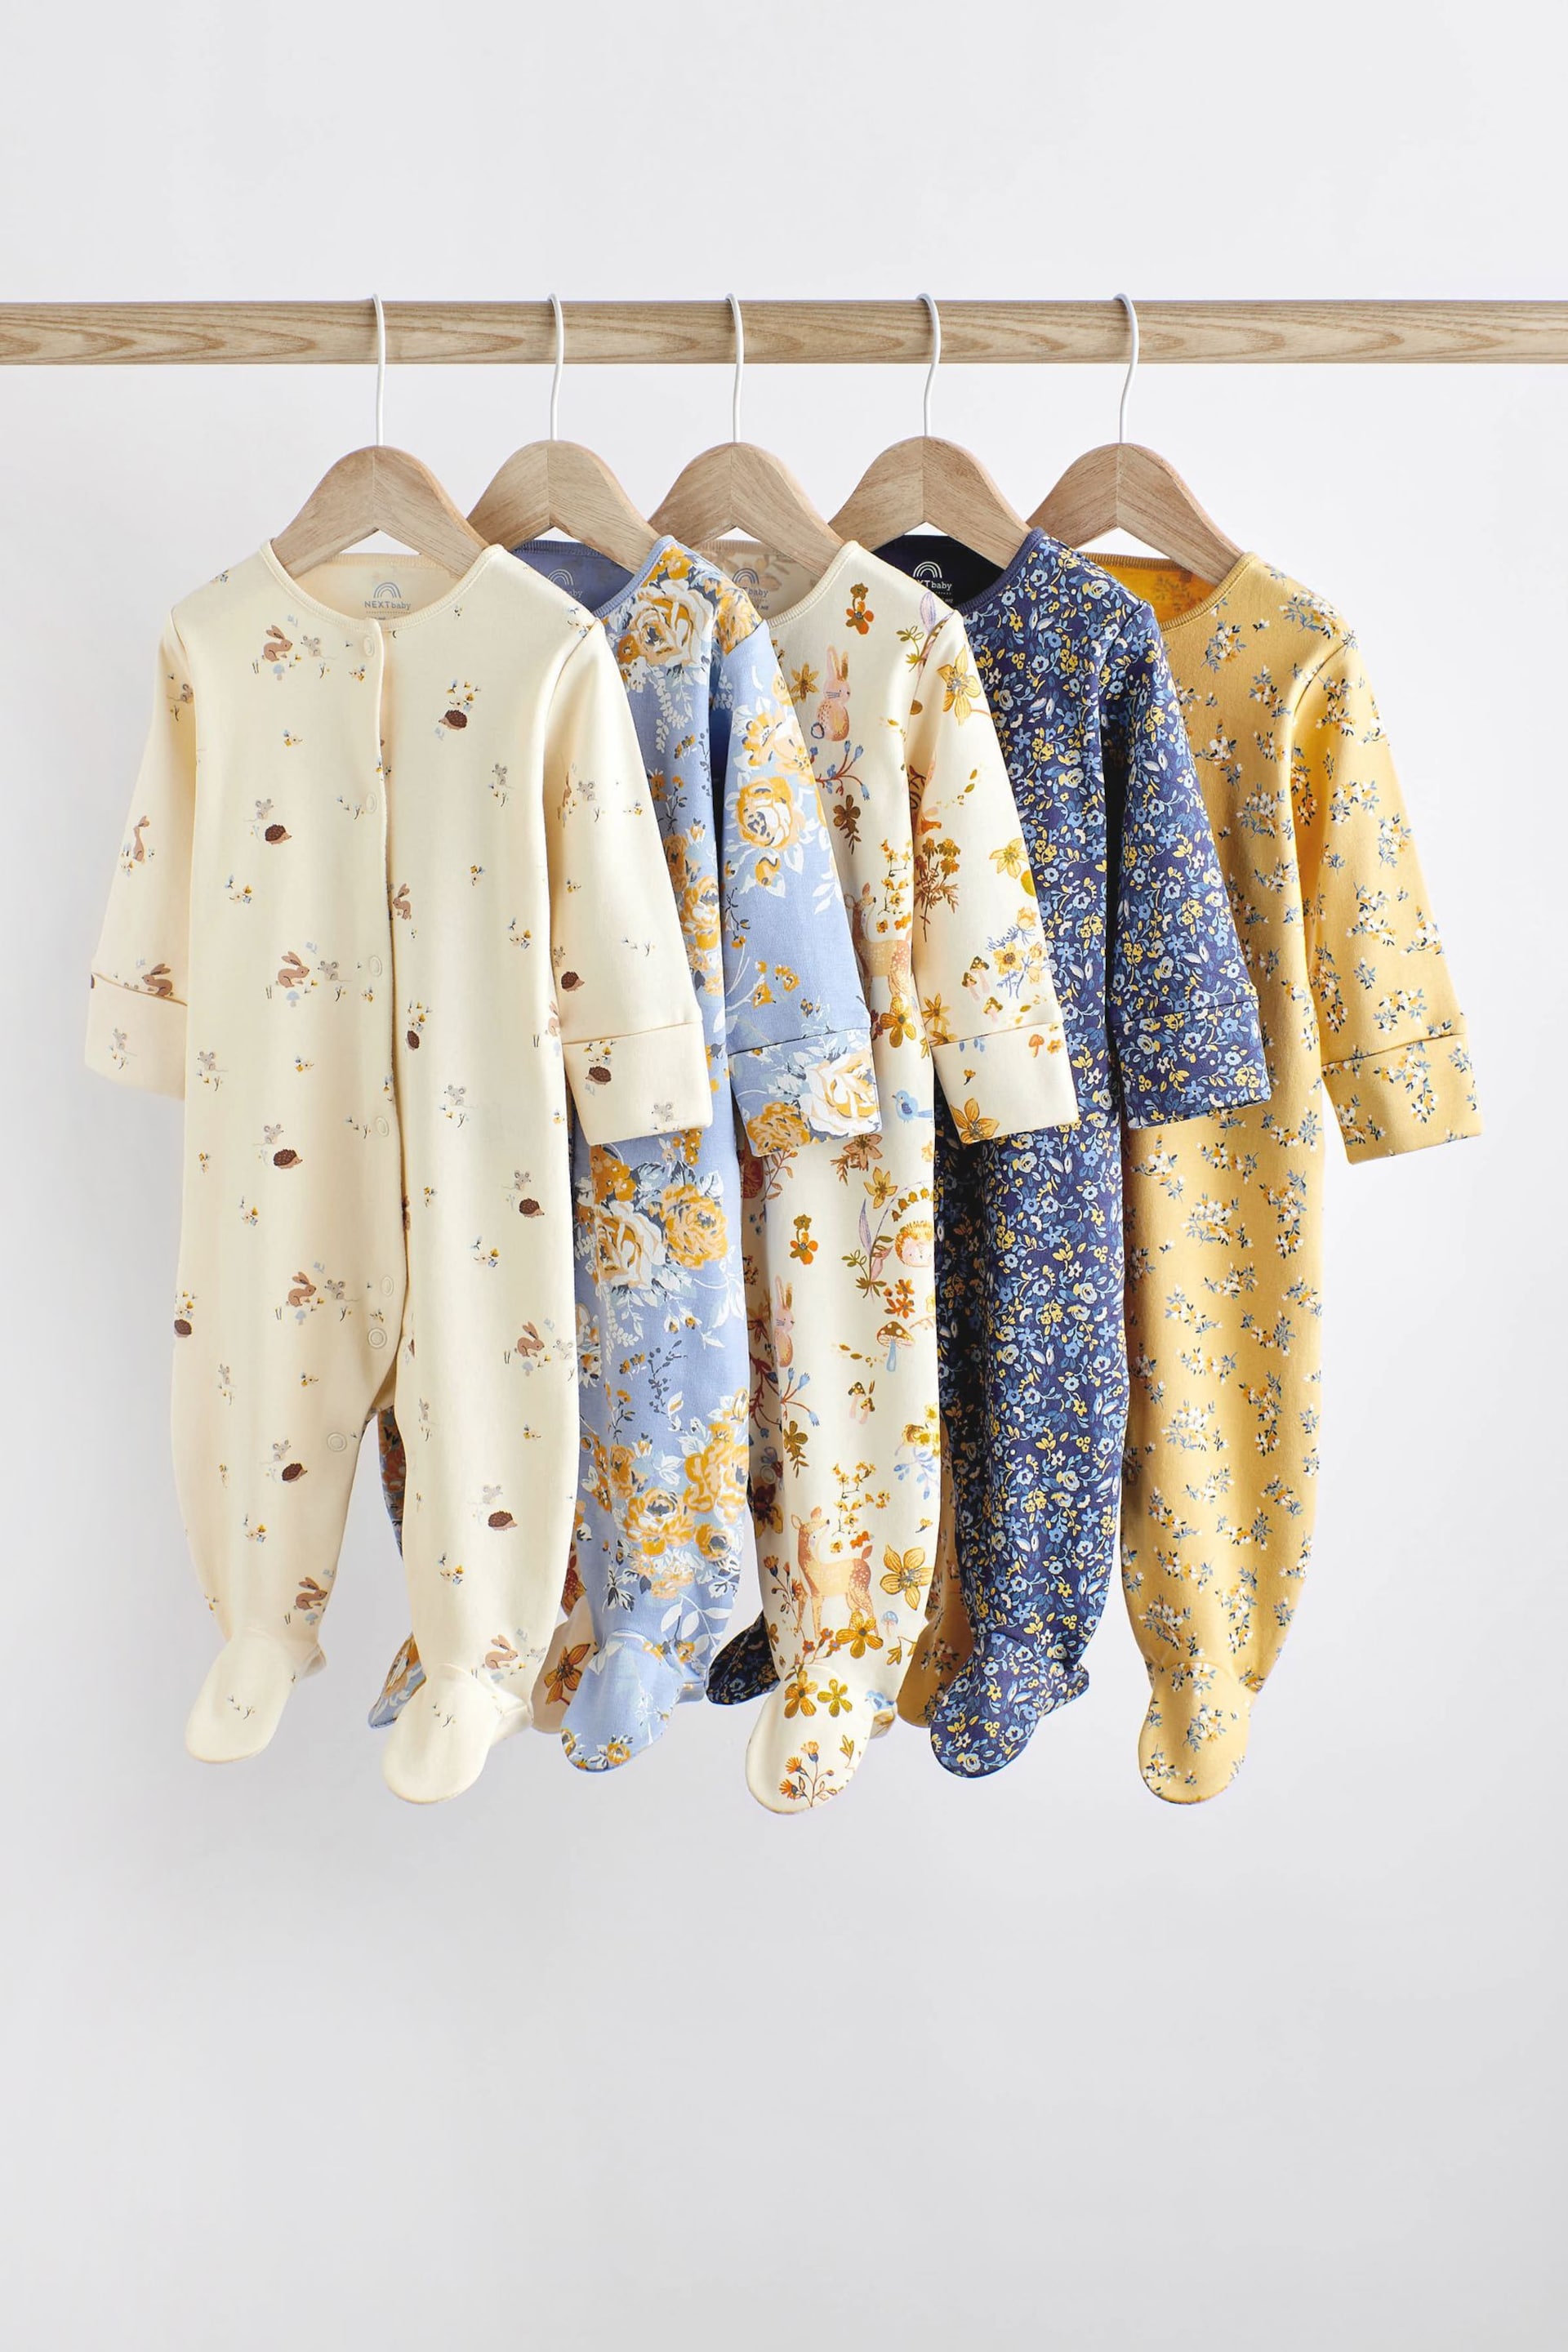 Ochre Yellow Baby Footed Sleepsuits 5 Pack (0-2yrs) - Image 1 of 16